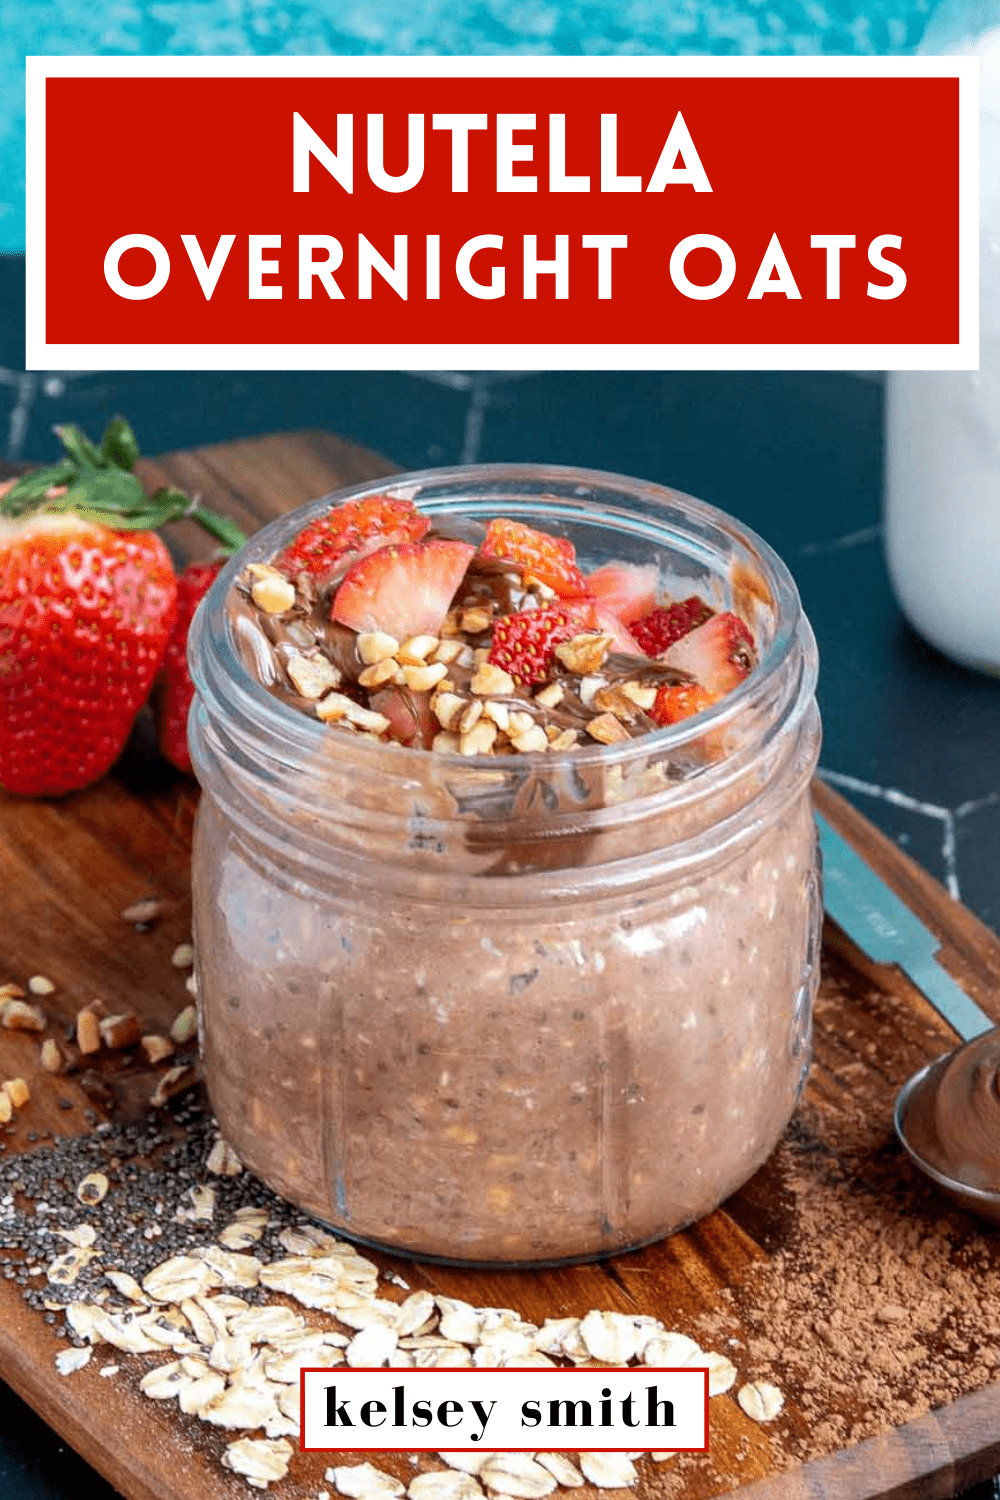 Nutella overnight oats in a mason jar topped with strawberries, Nutella, and hazelnuts. Text at the top of the image says Nutella Overnight Oats.